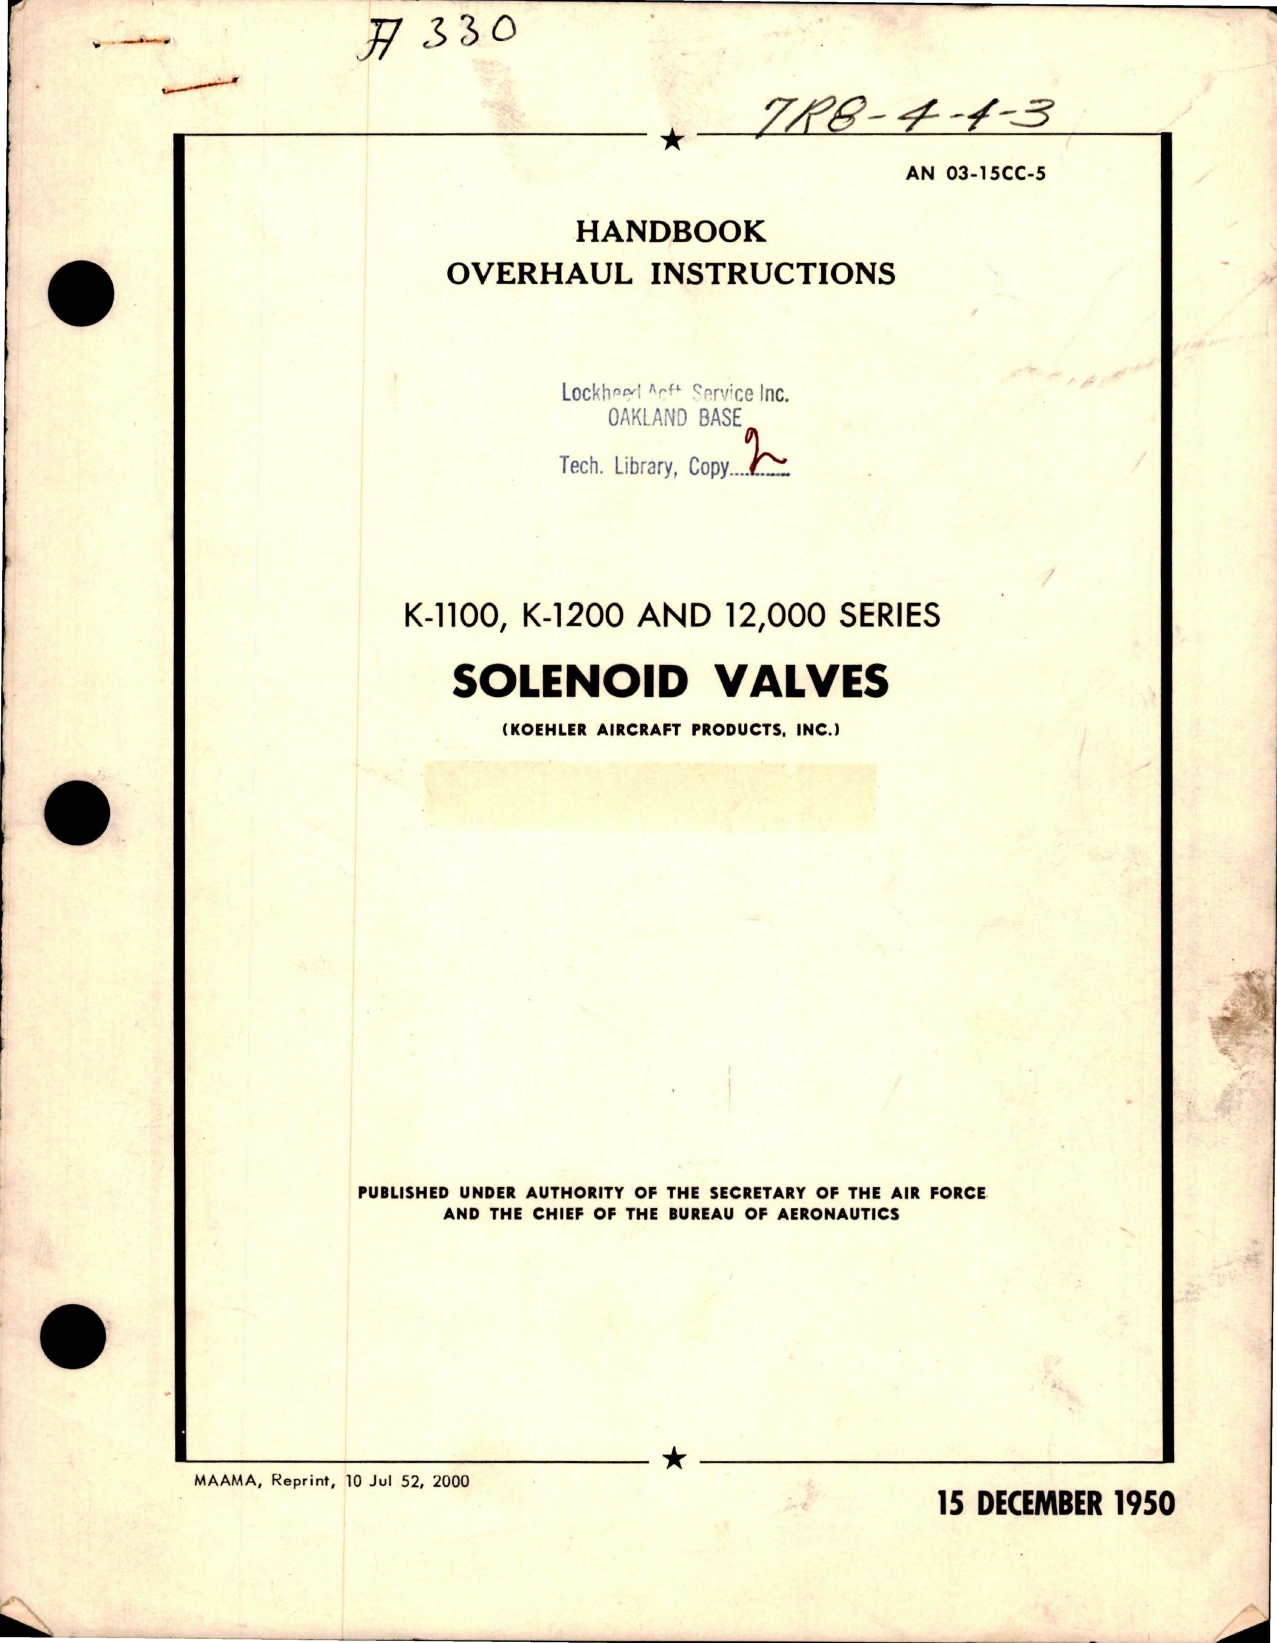 Sample page 1 from AirCorps Library document: Overhaul Instructions for Solenoid Valves - K1100, K1200 and 12,000 Series 